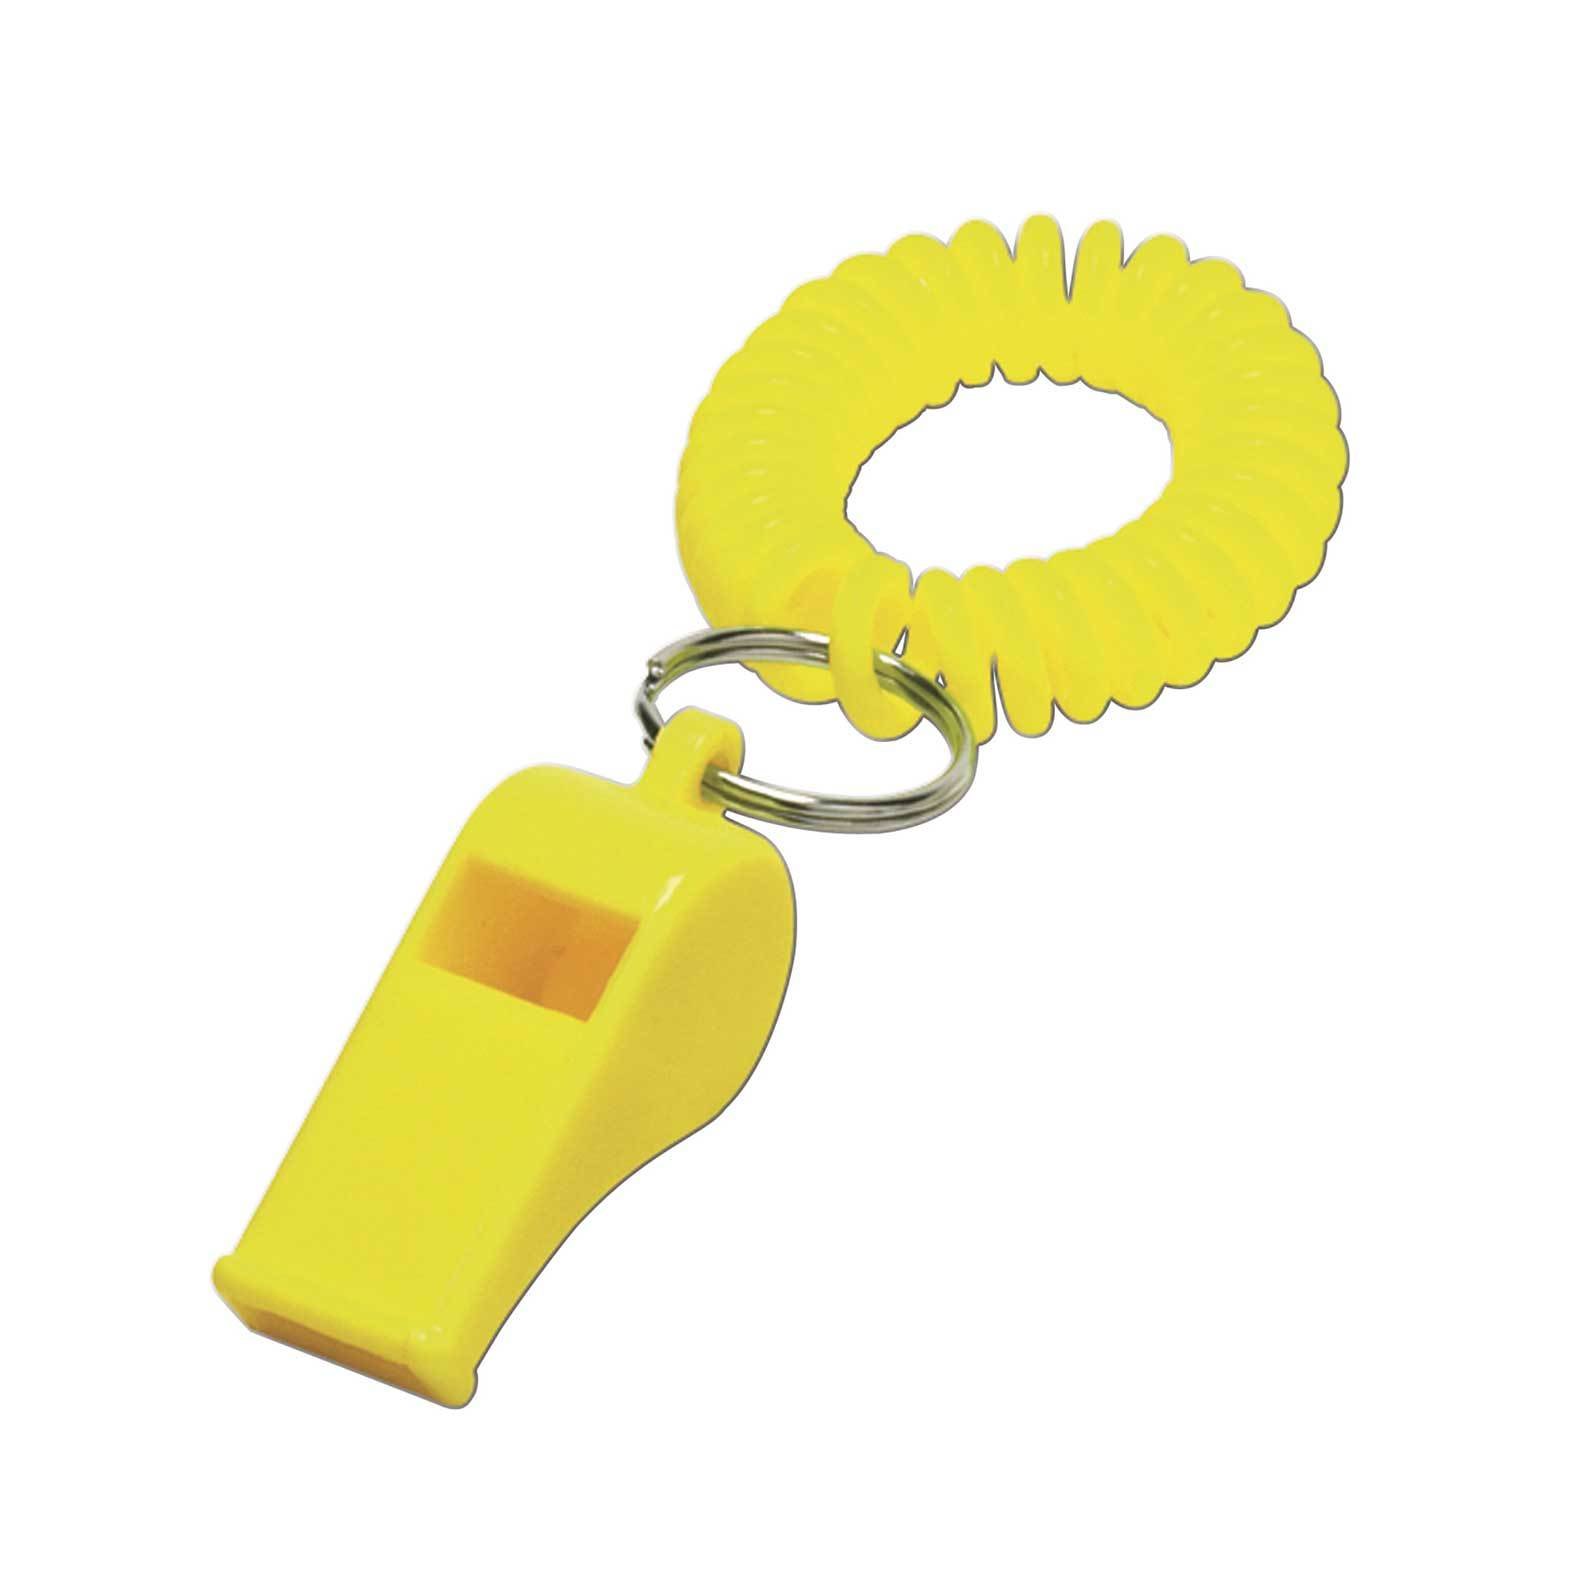 Whistles With A Wrist Cords | Whistles | Redbows Ltd